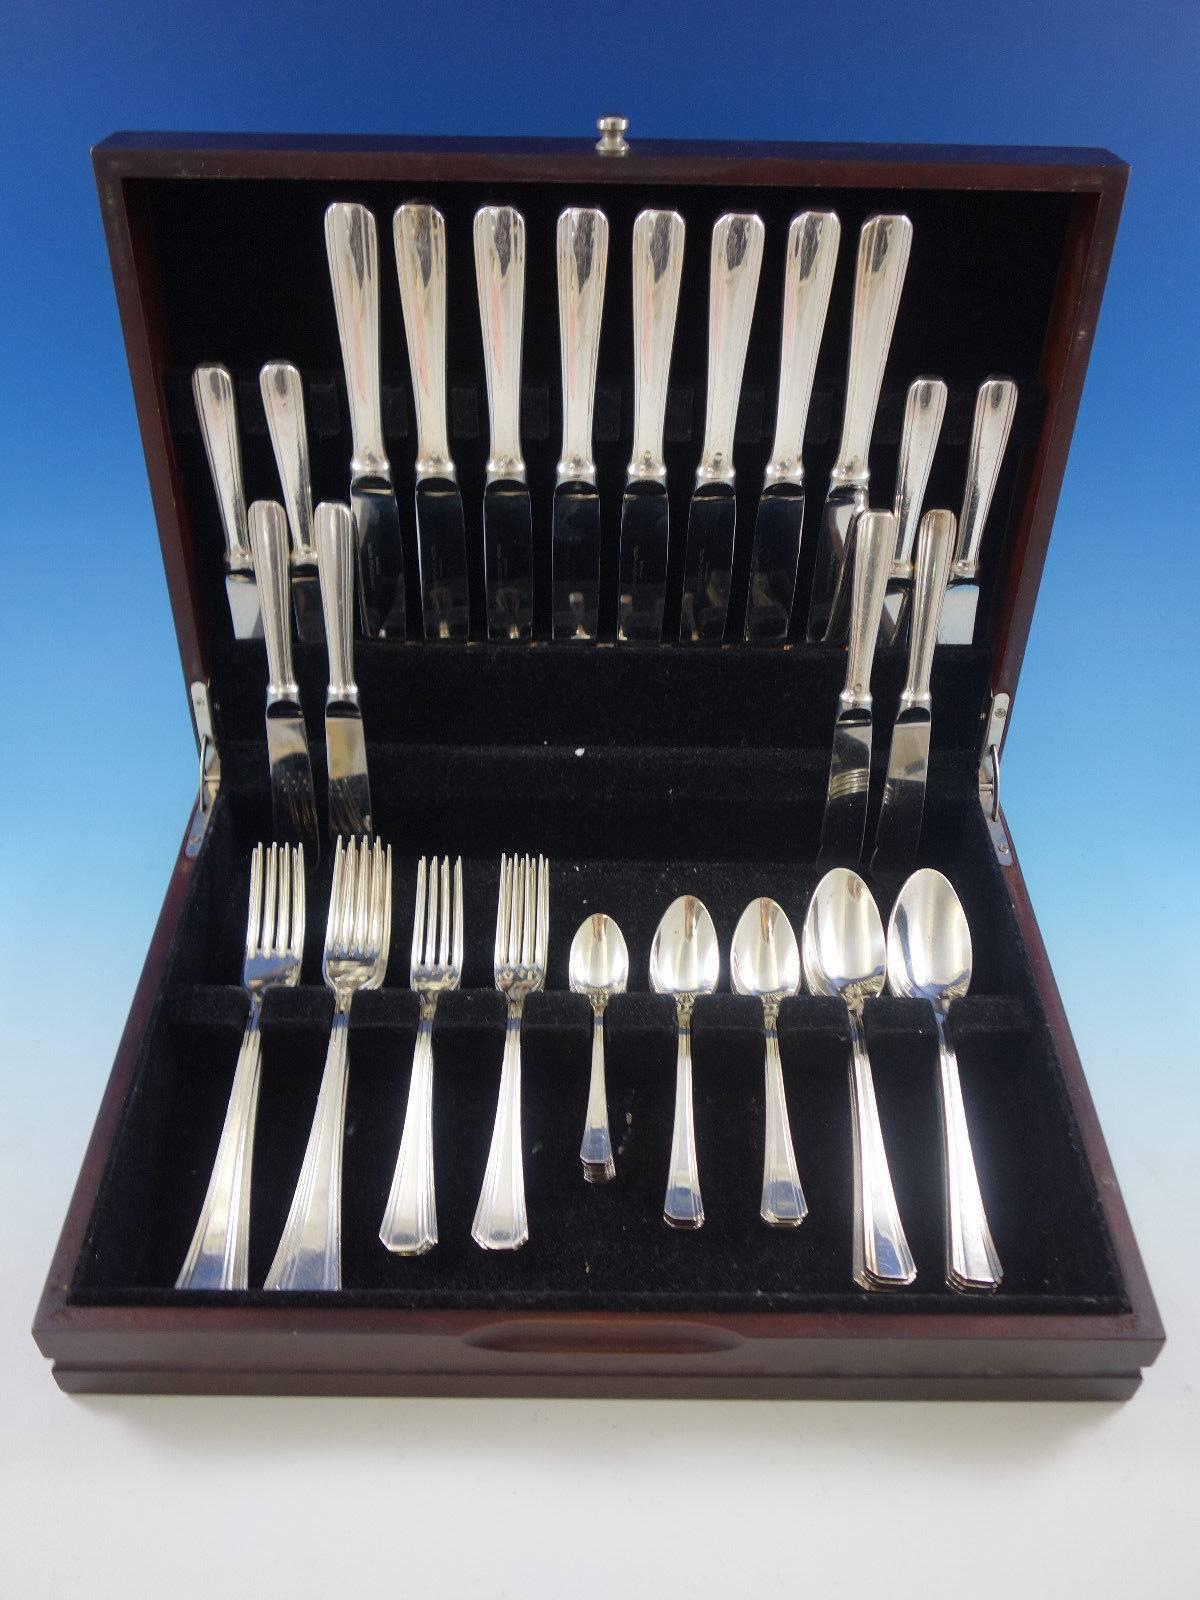 Palme Hotelware Christofle France silver plated flatware set of 56 pieces. This set includes: Eight dinner size knives, 9 3/4